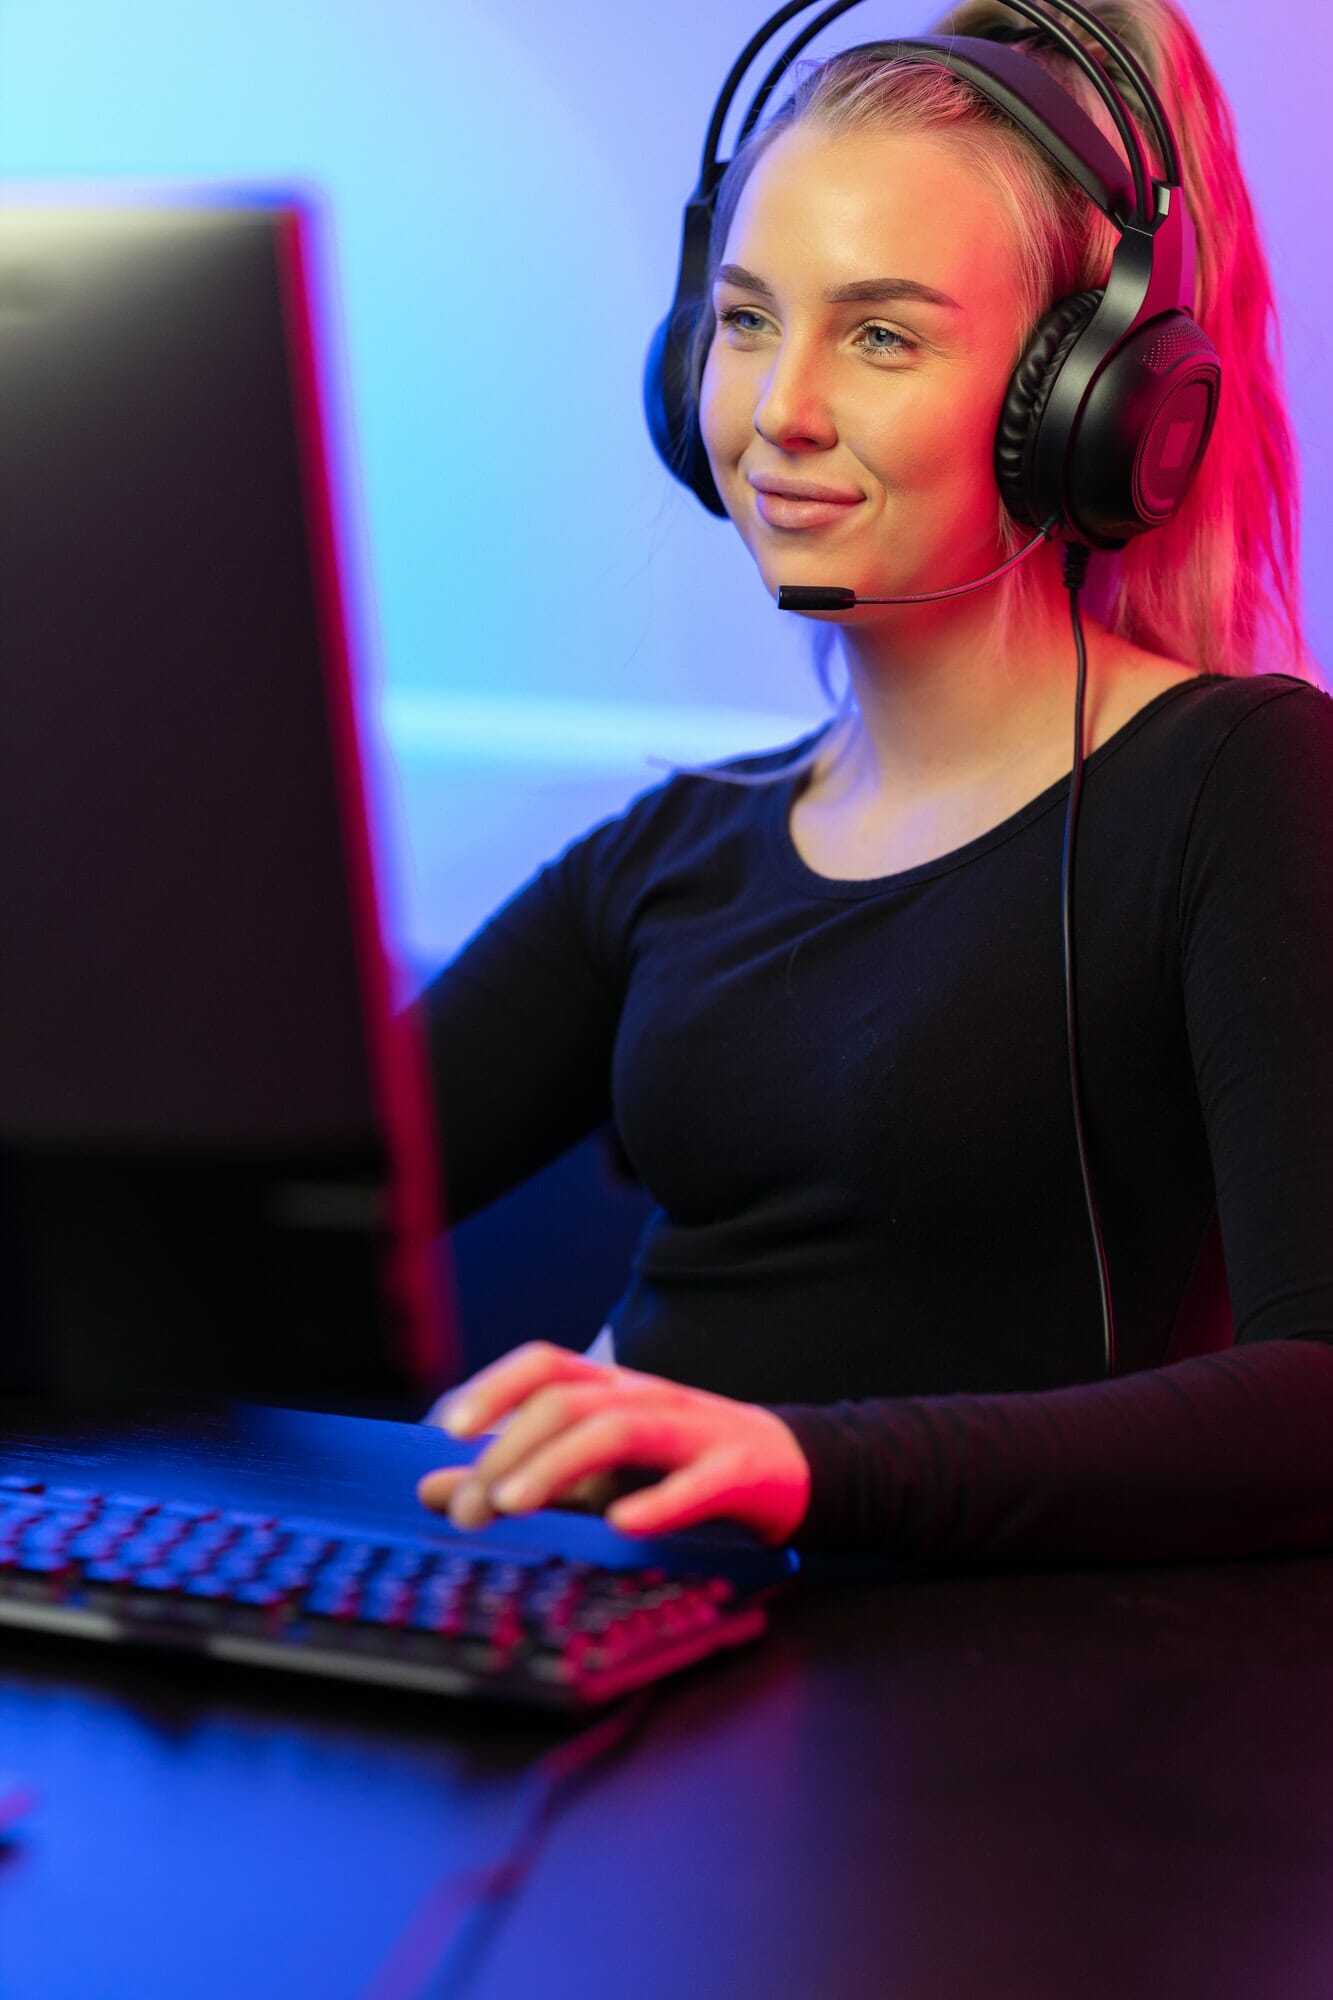 Smiling Professional E-sport Gamer Girl with Headset Playing Online Video Game